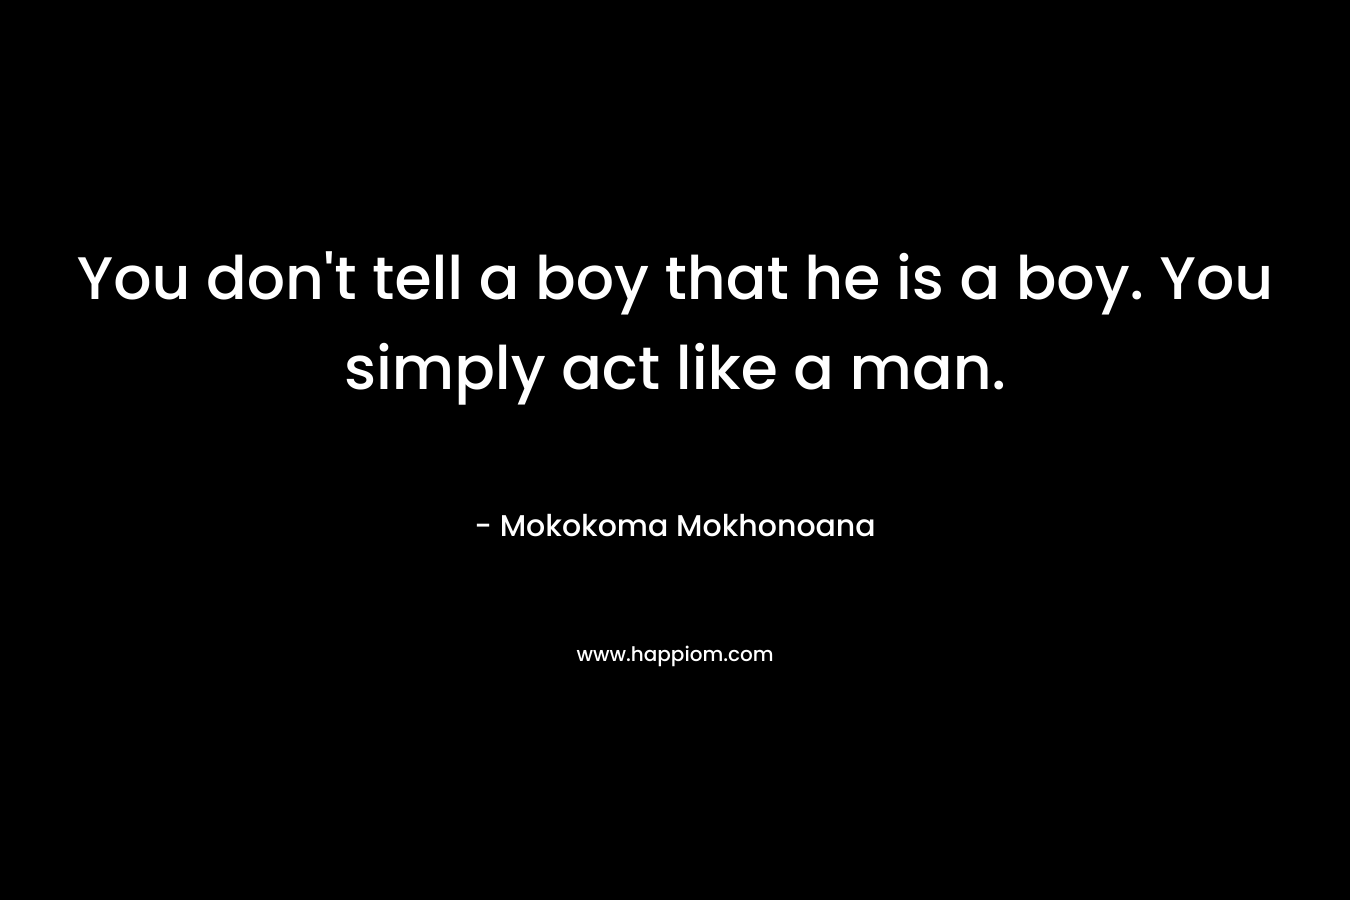 You don't tell a boy that he is a boy. You simply act like a man.